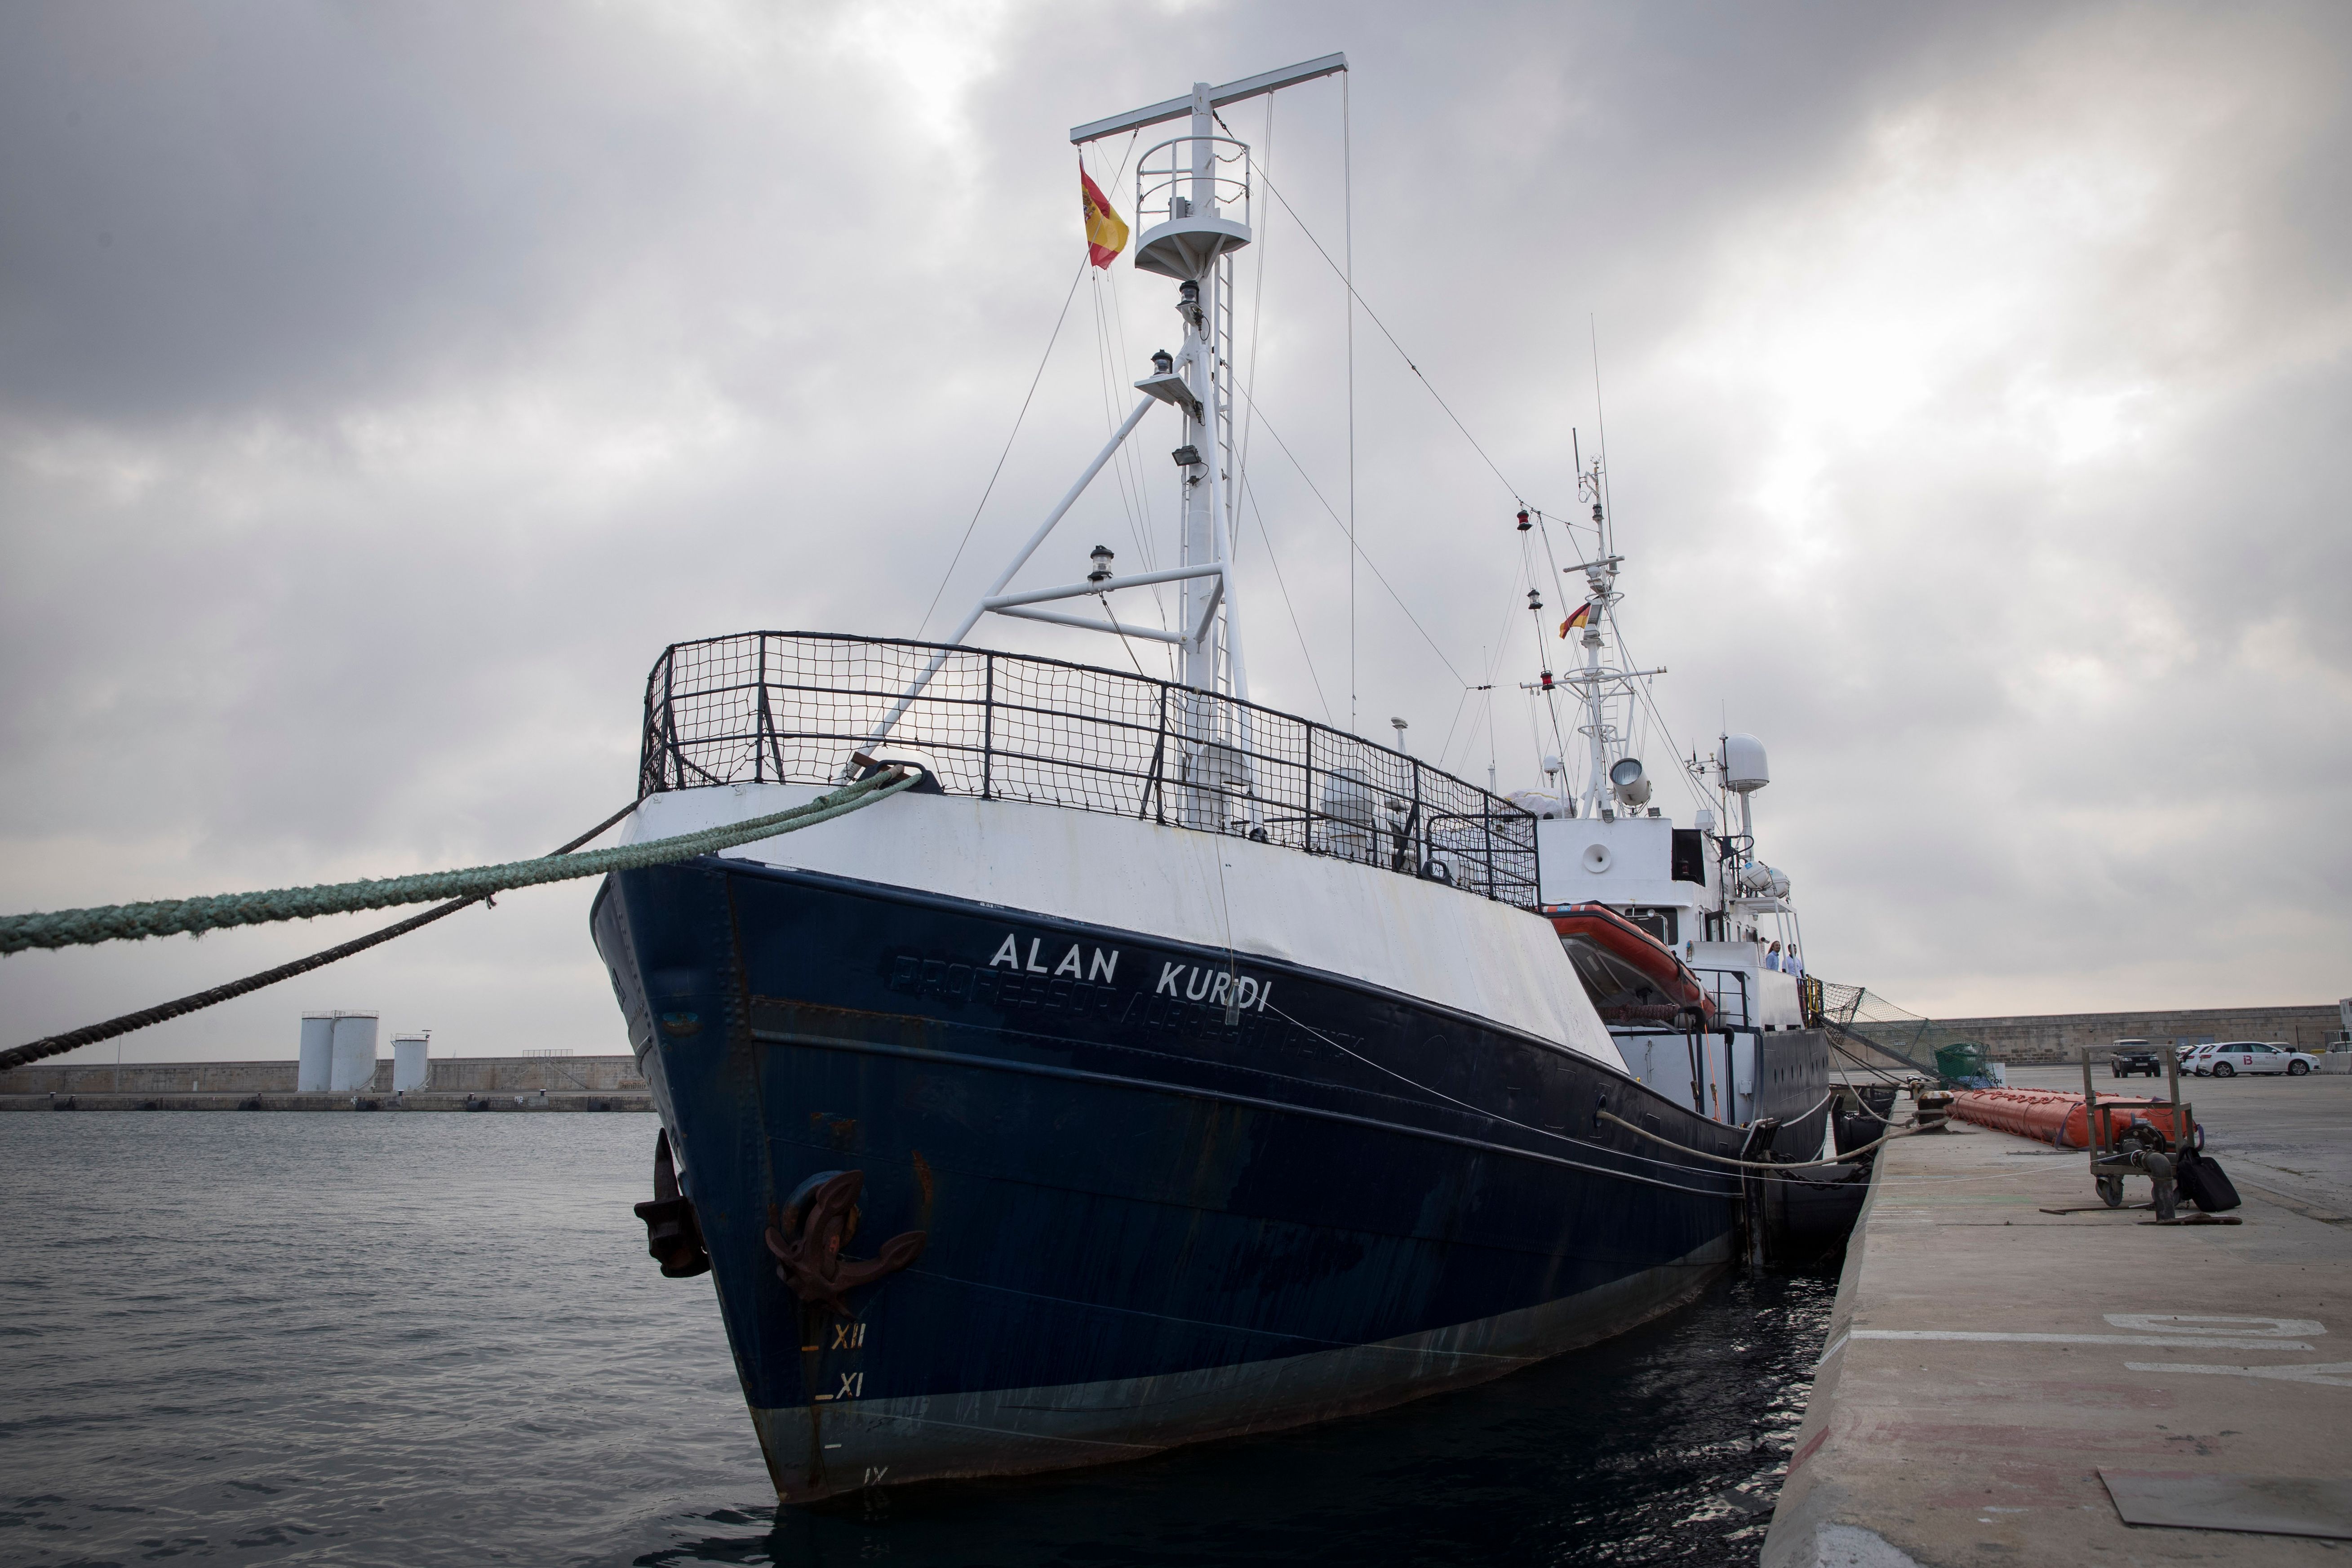 A picture shows the Sea-Eye rescue ship named after Alan Kurdi during its inauguration in Palma de Mallorca on February 10, 2019. (JAIME REINA/AFP/Getty Images)